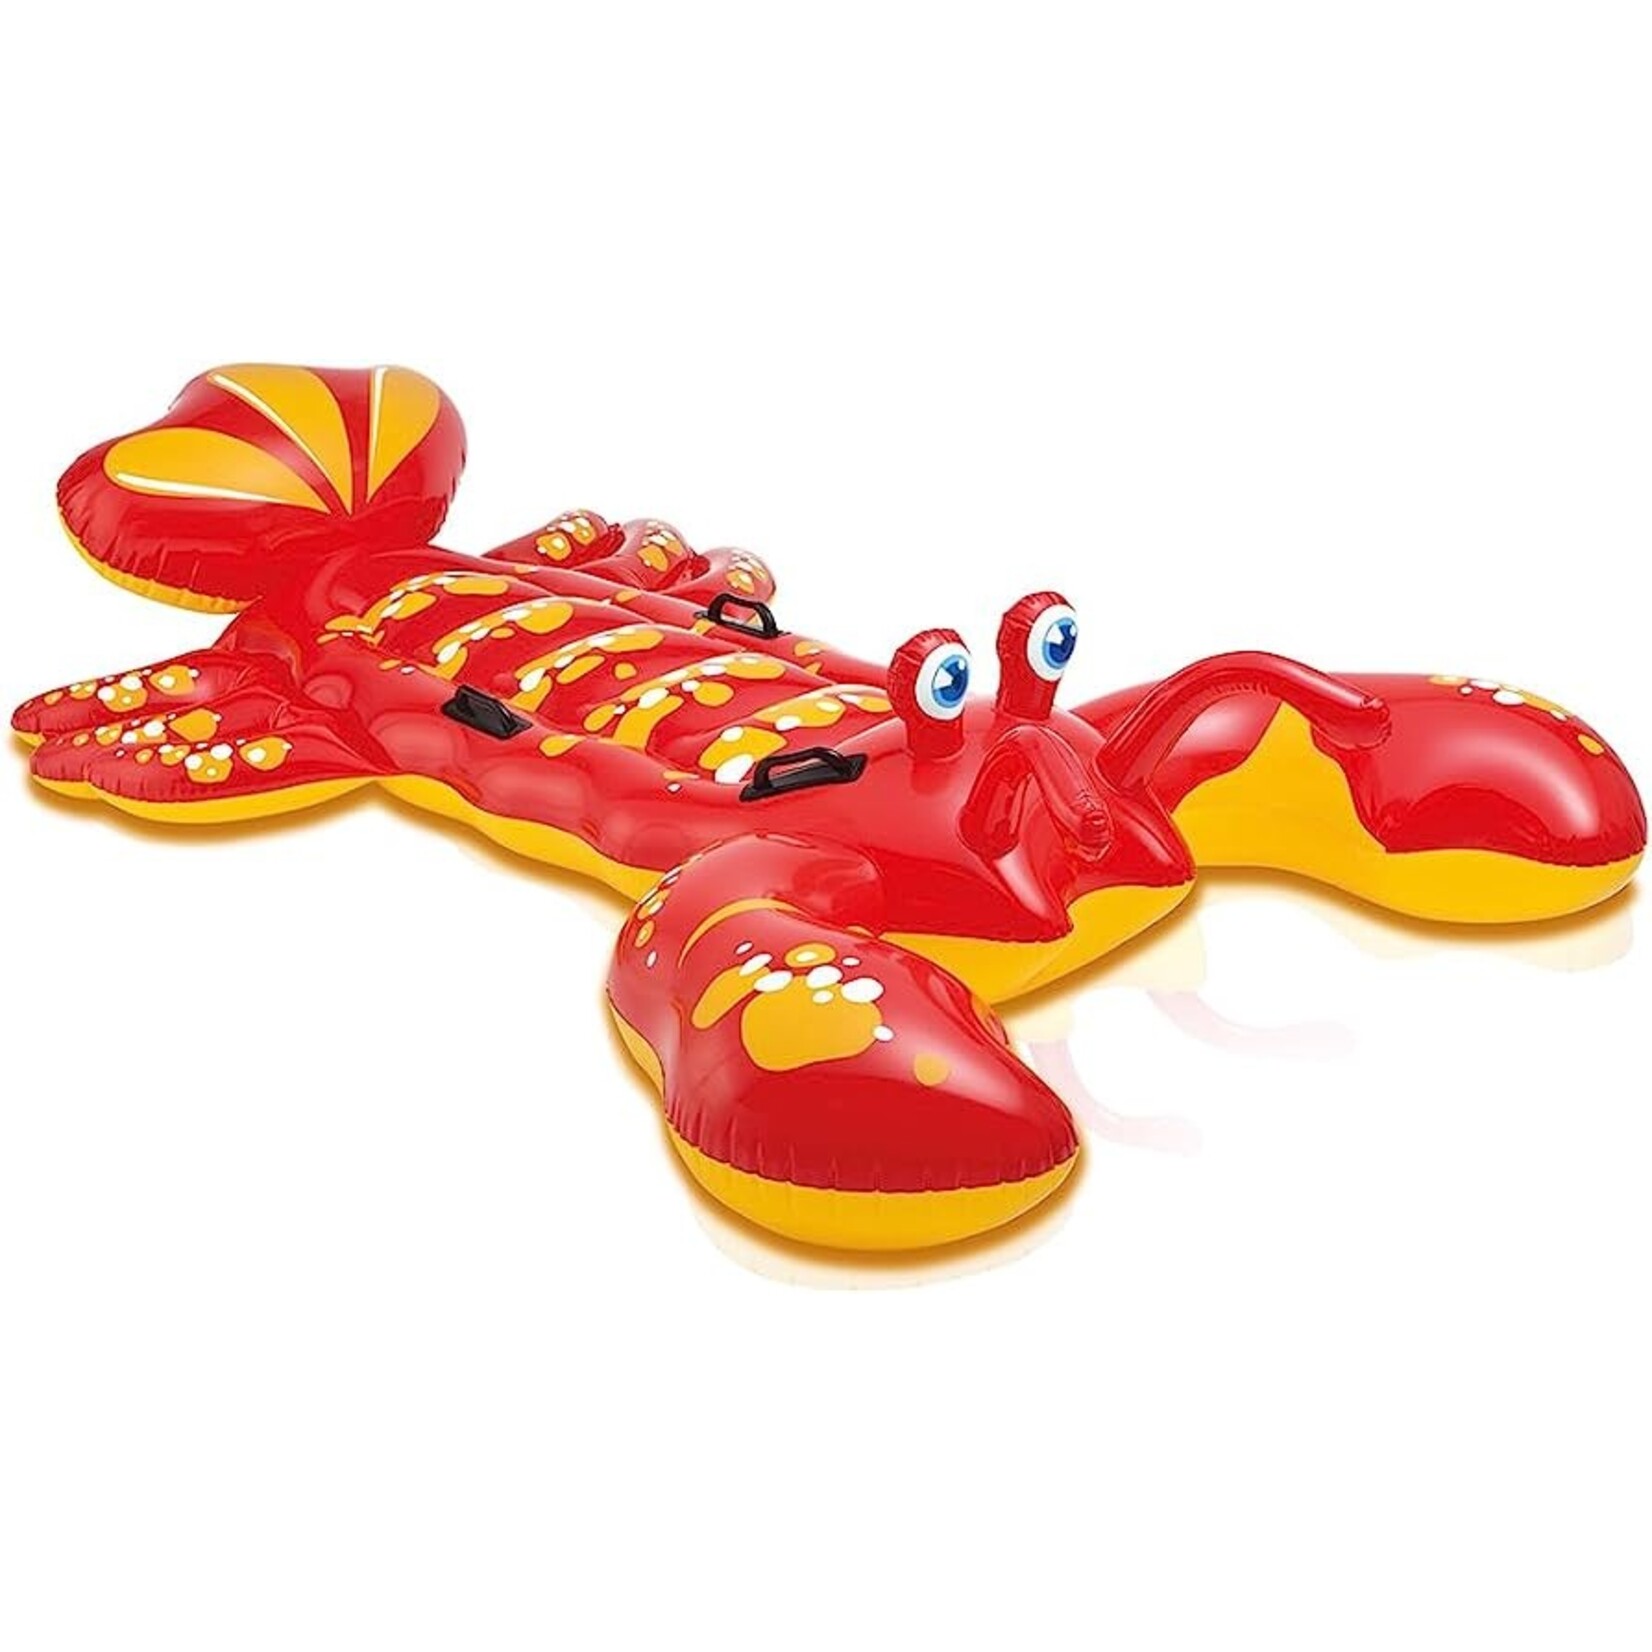 Intex Giant Lobster Ride On